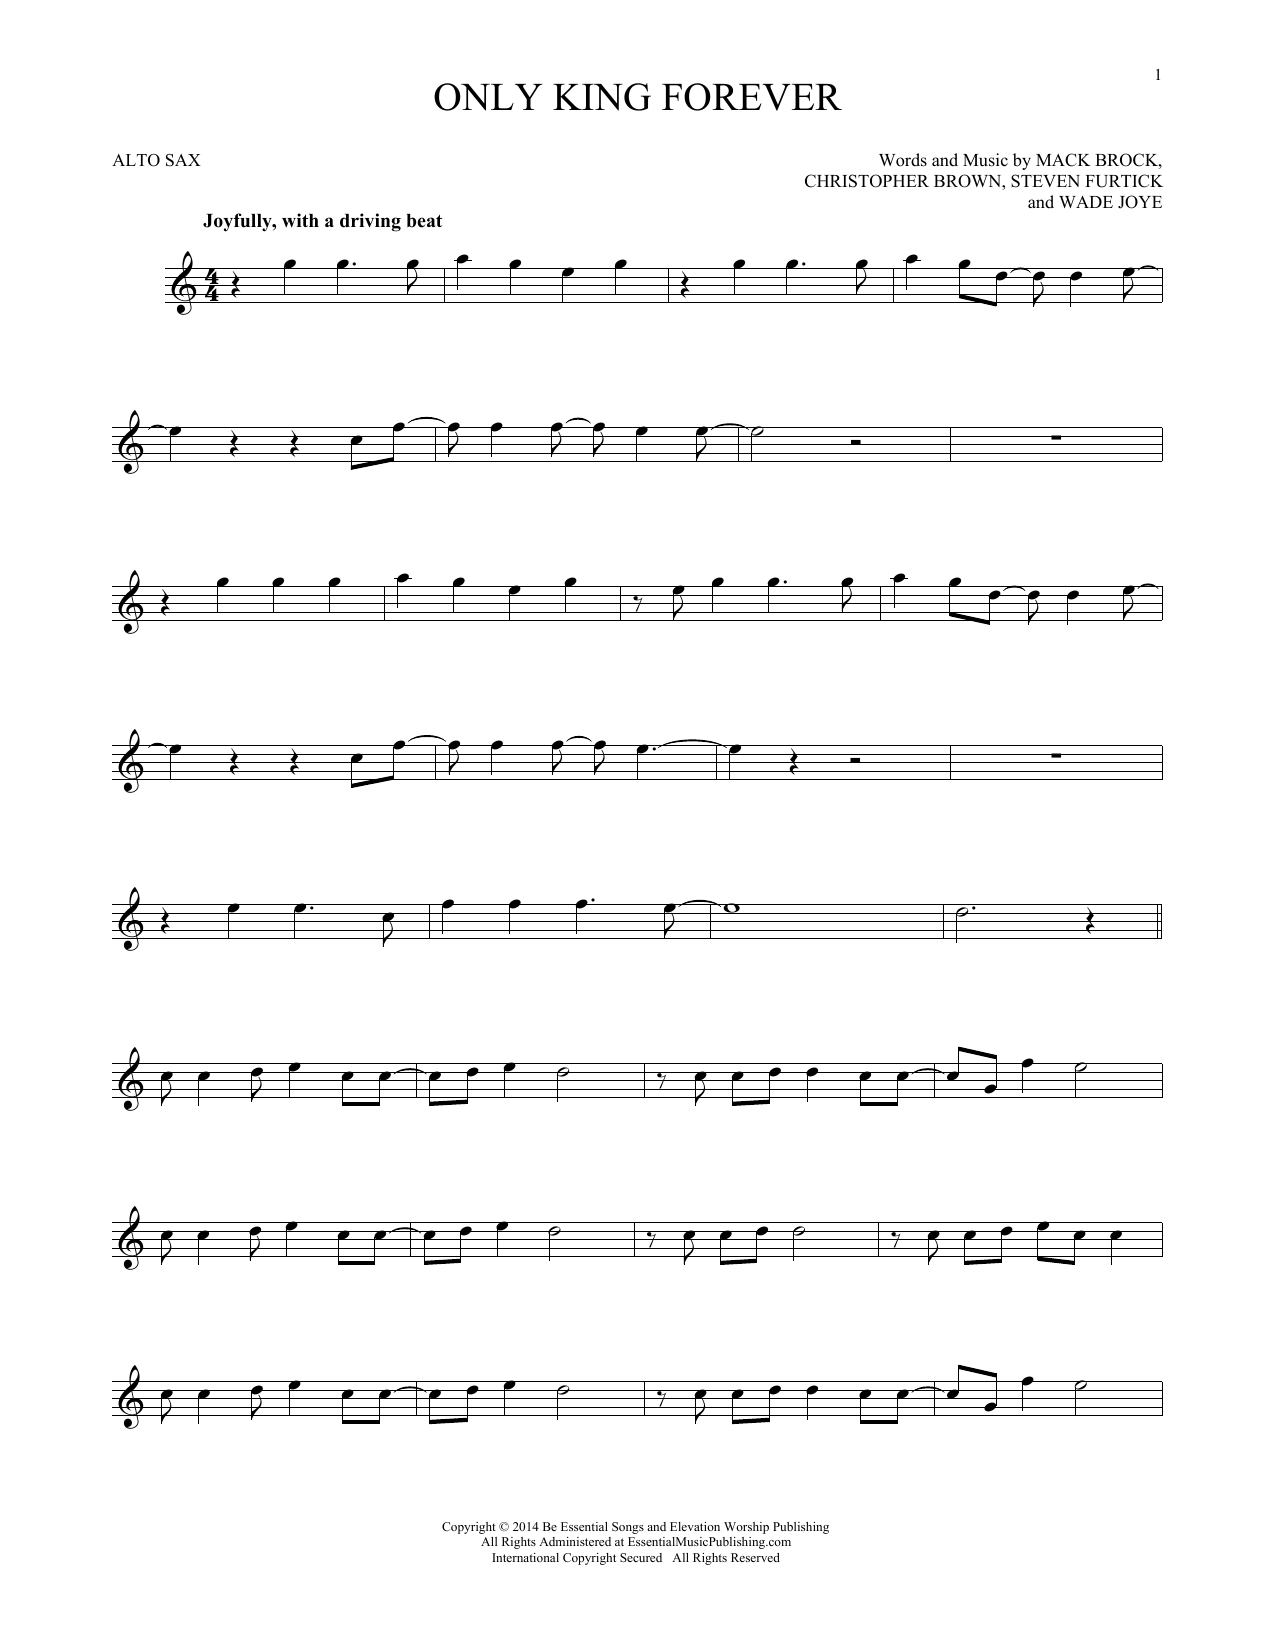 7eventh Time Down Only King Forever sheet music notes printable PDF score